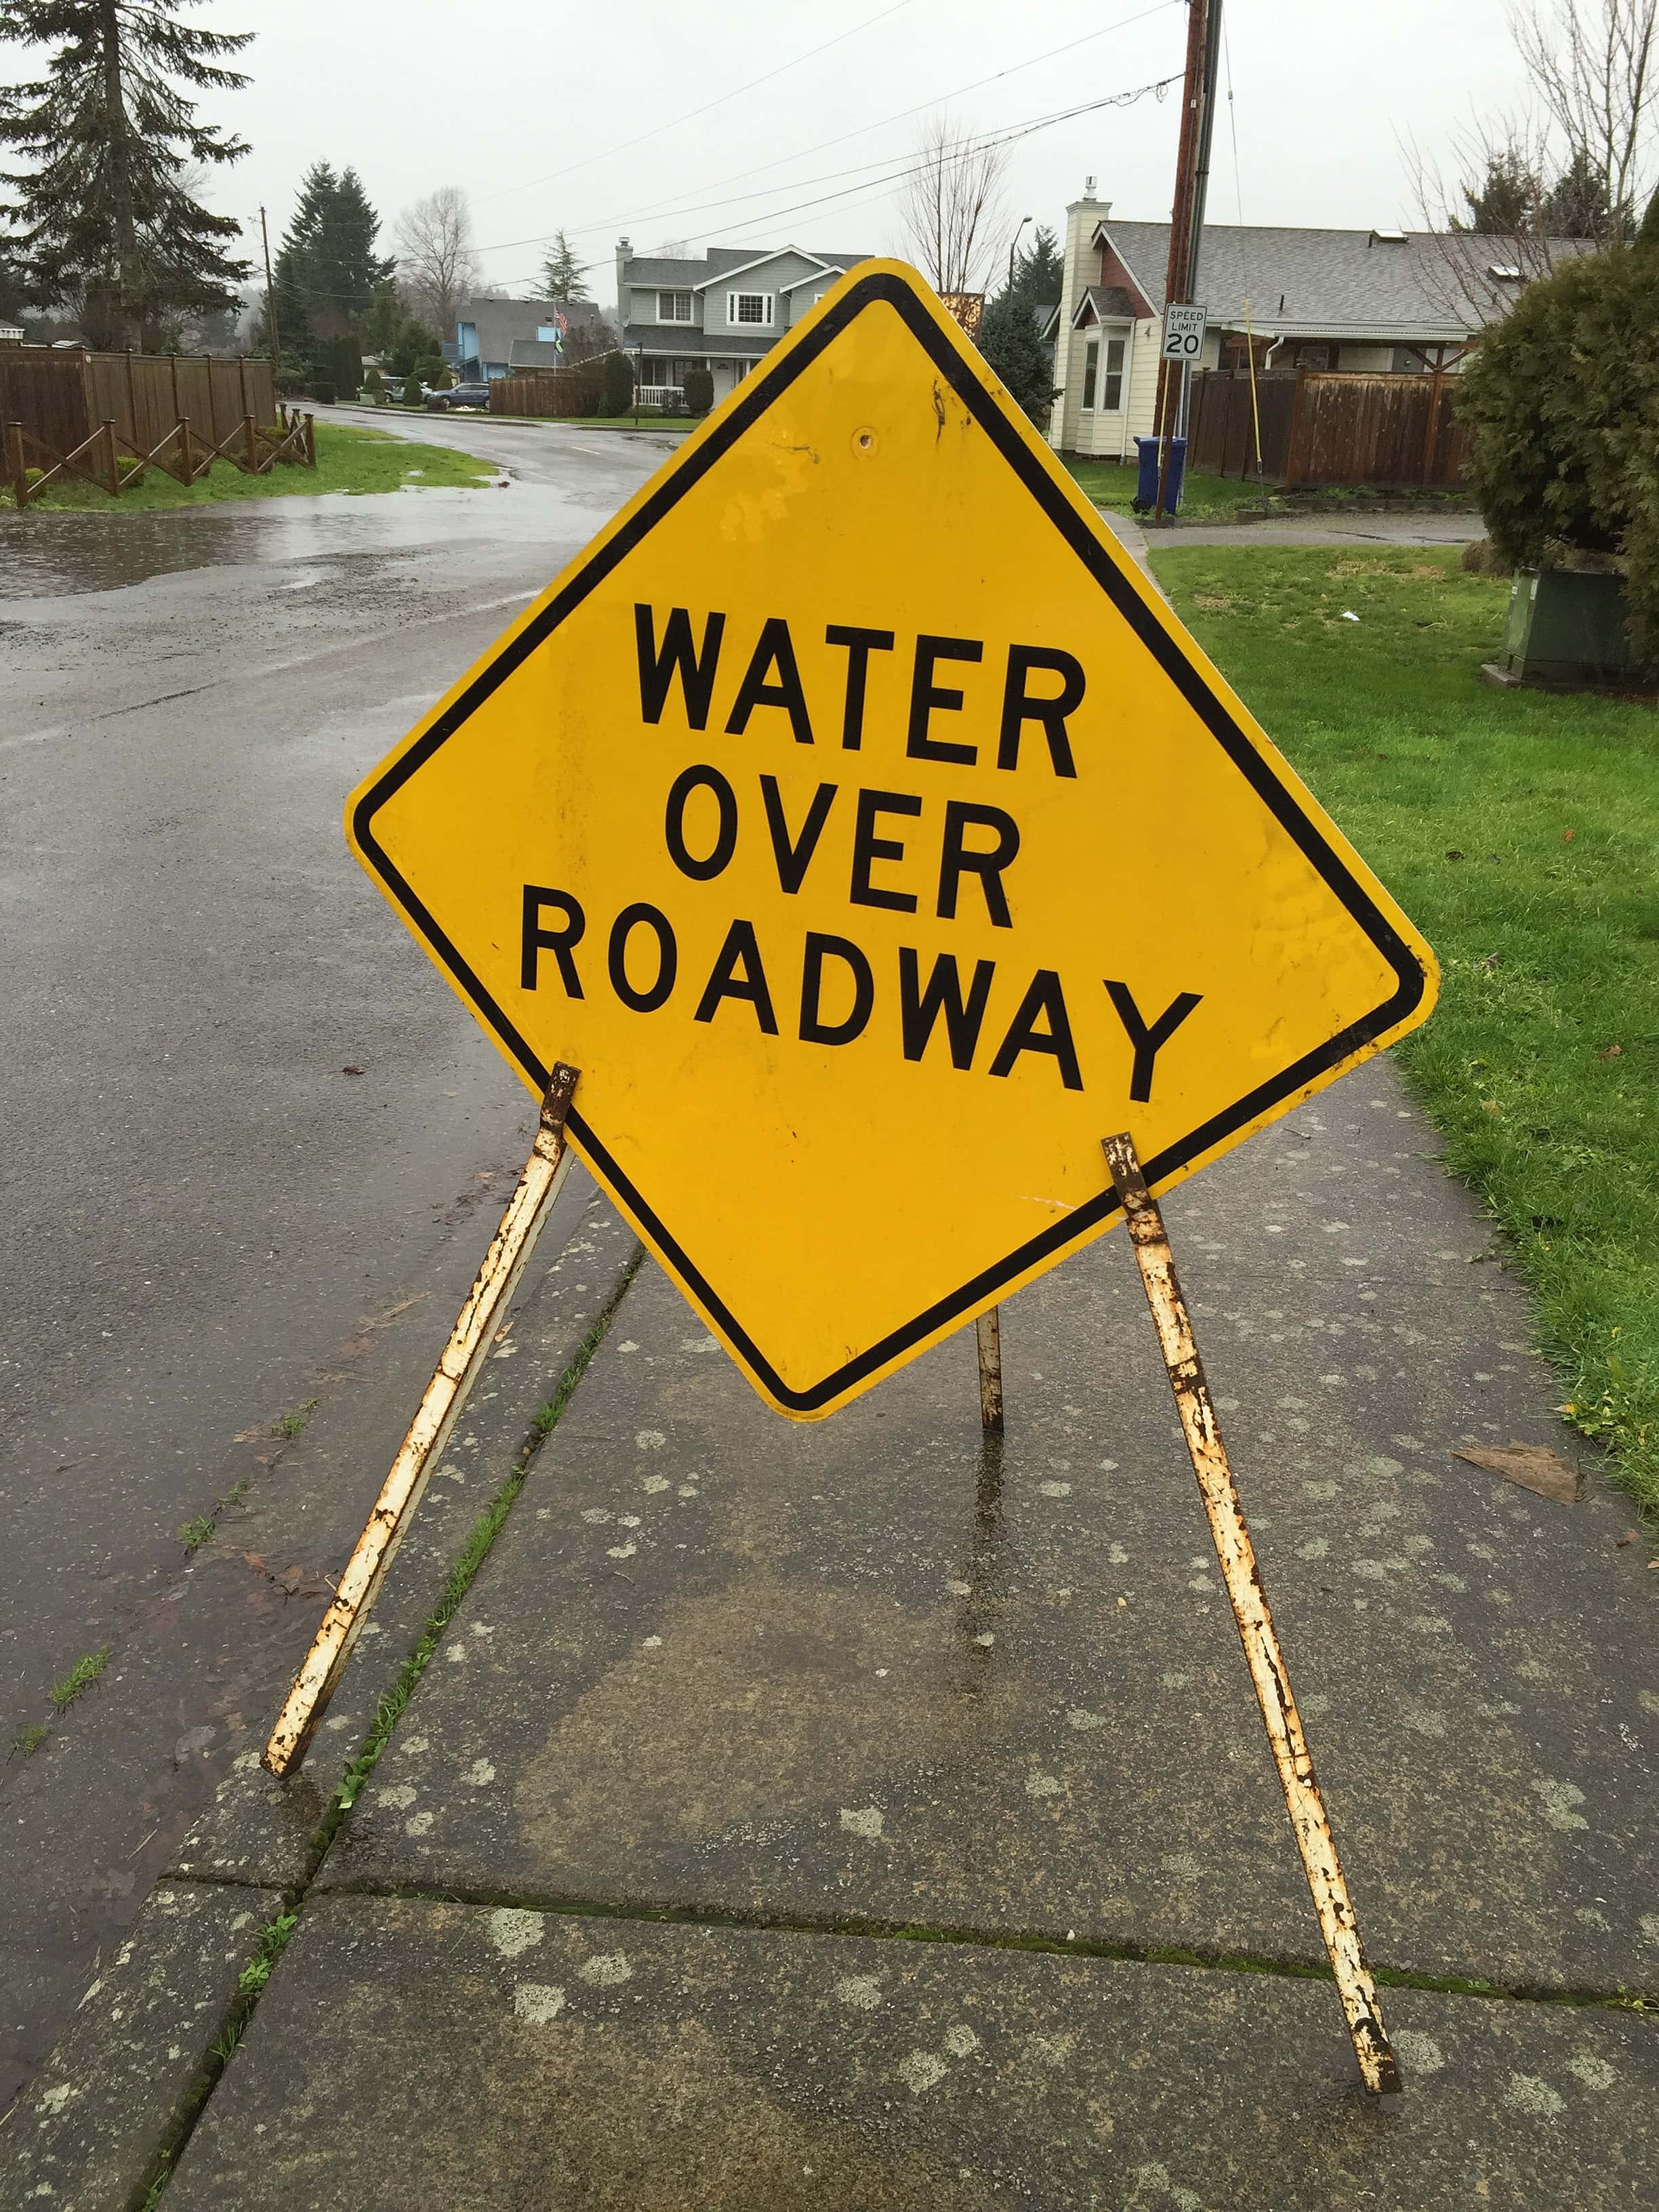 2448px-water_over_roadway_warning_road_signs